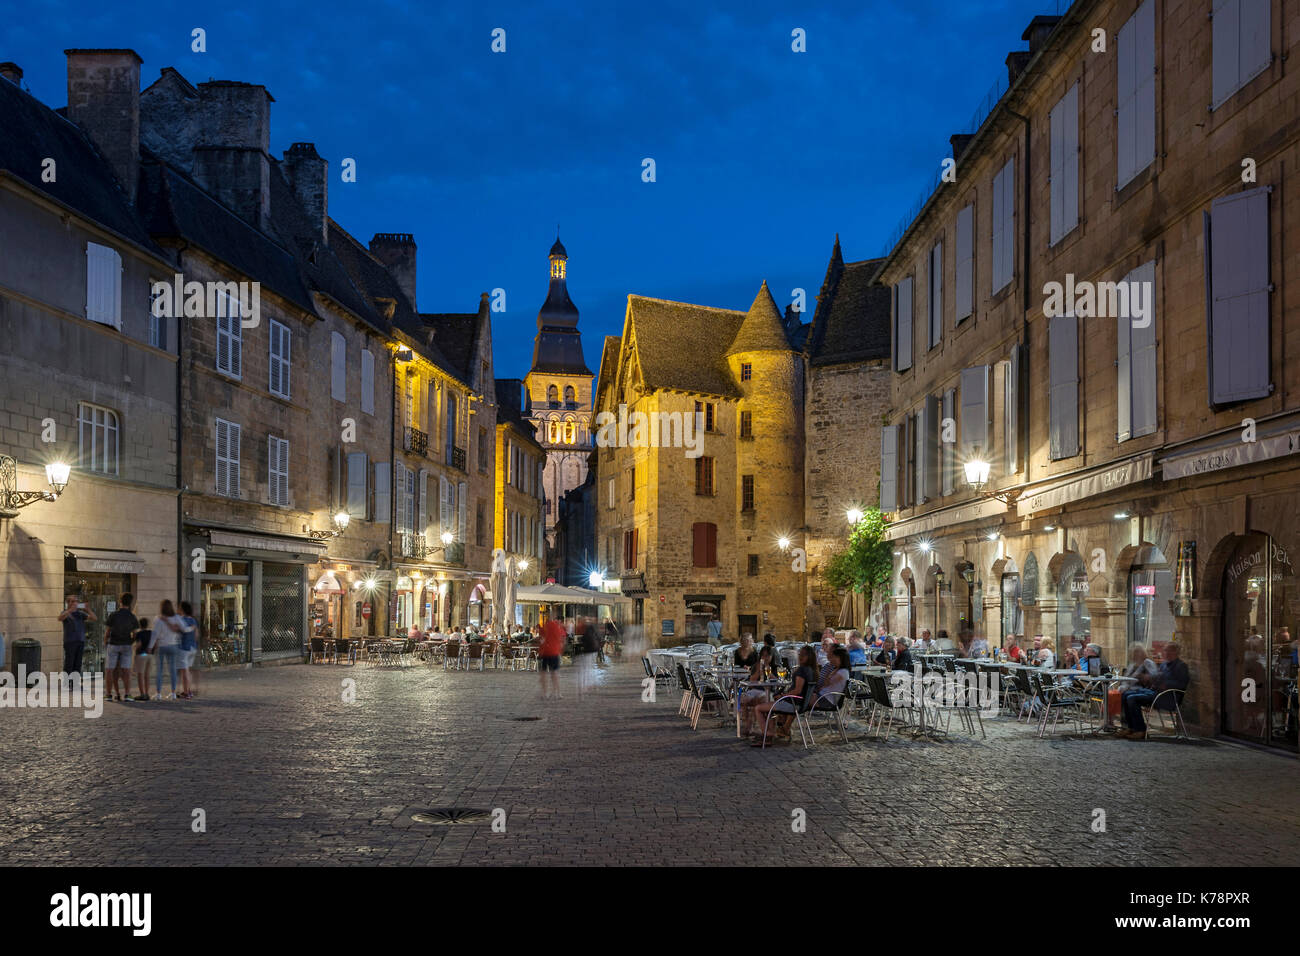 Dusk view of the old town in Sarlat in the Dordogne region of southwest France. Stock Photo